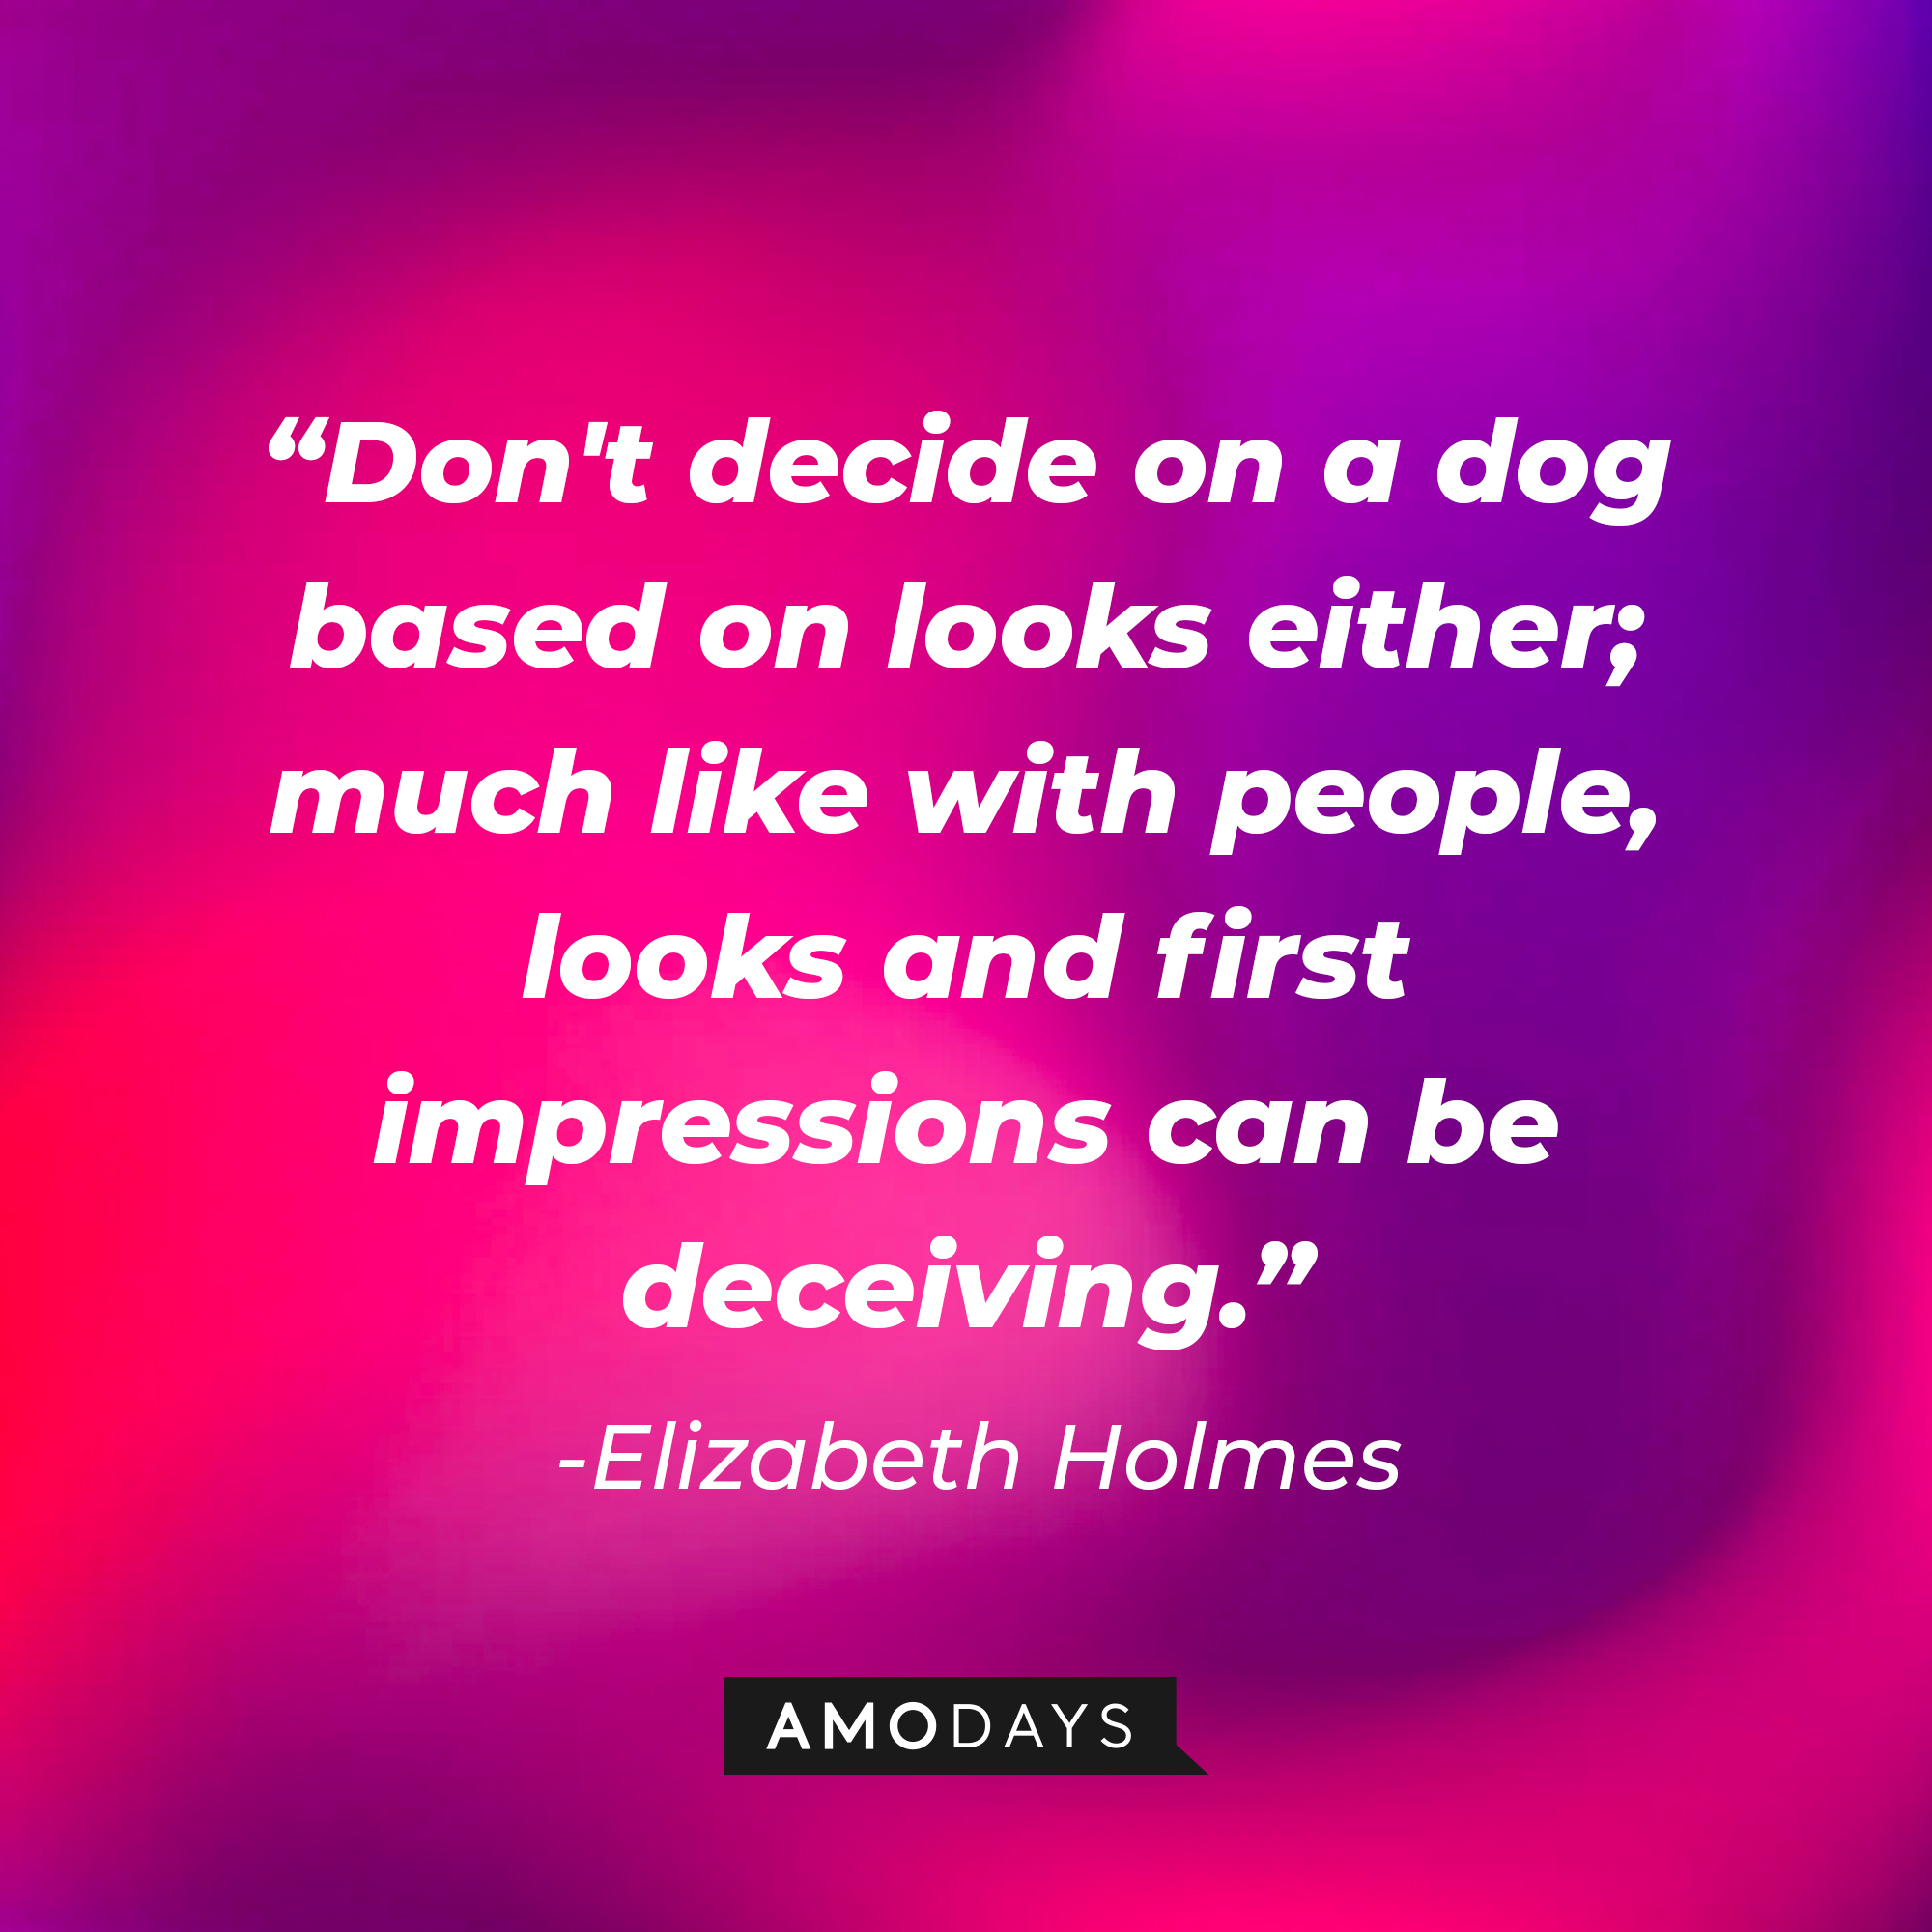 Elizabeth Holmes' quote: "Don't decide on a dog based on looks either; much like with people, looks and first impressions can be deceiving." | Source: Amodays